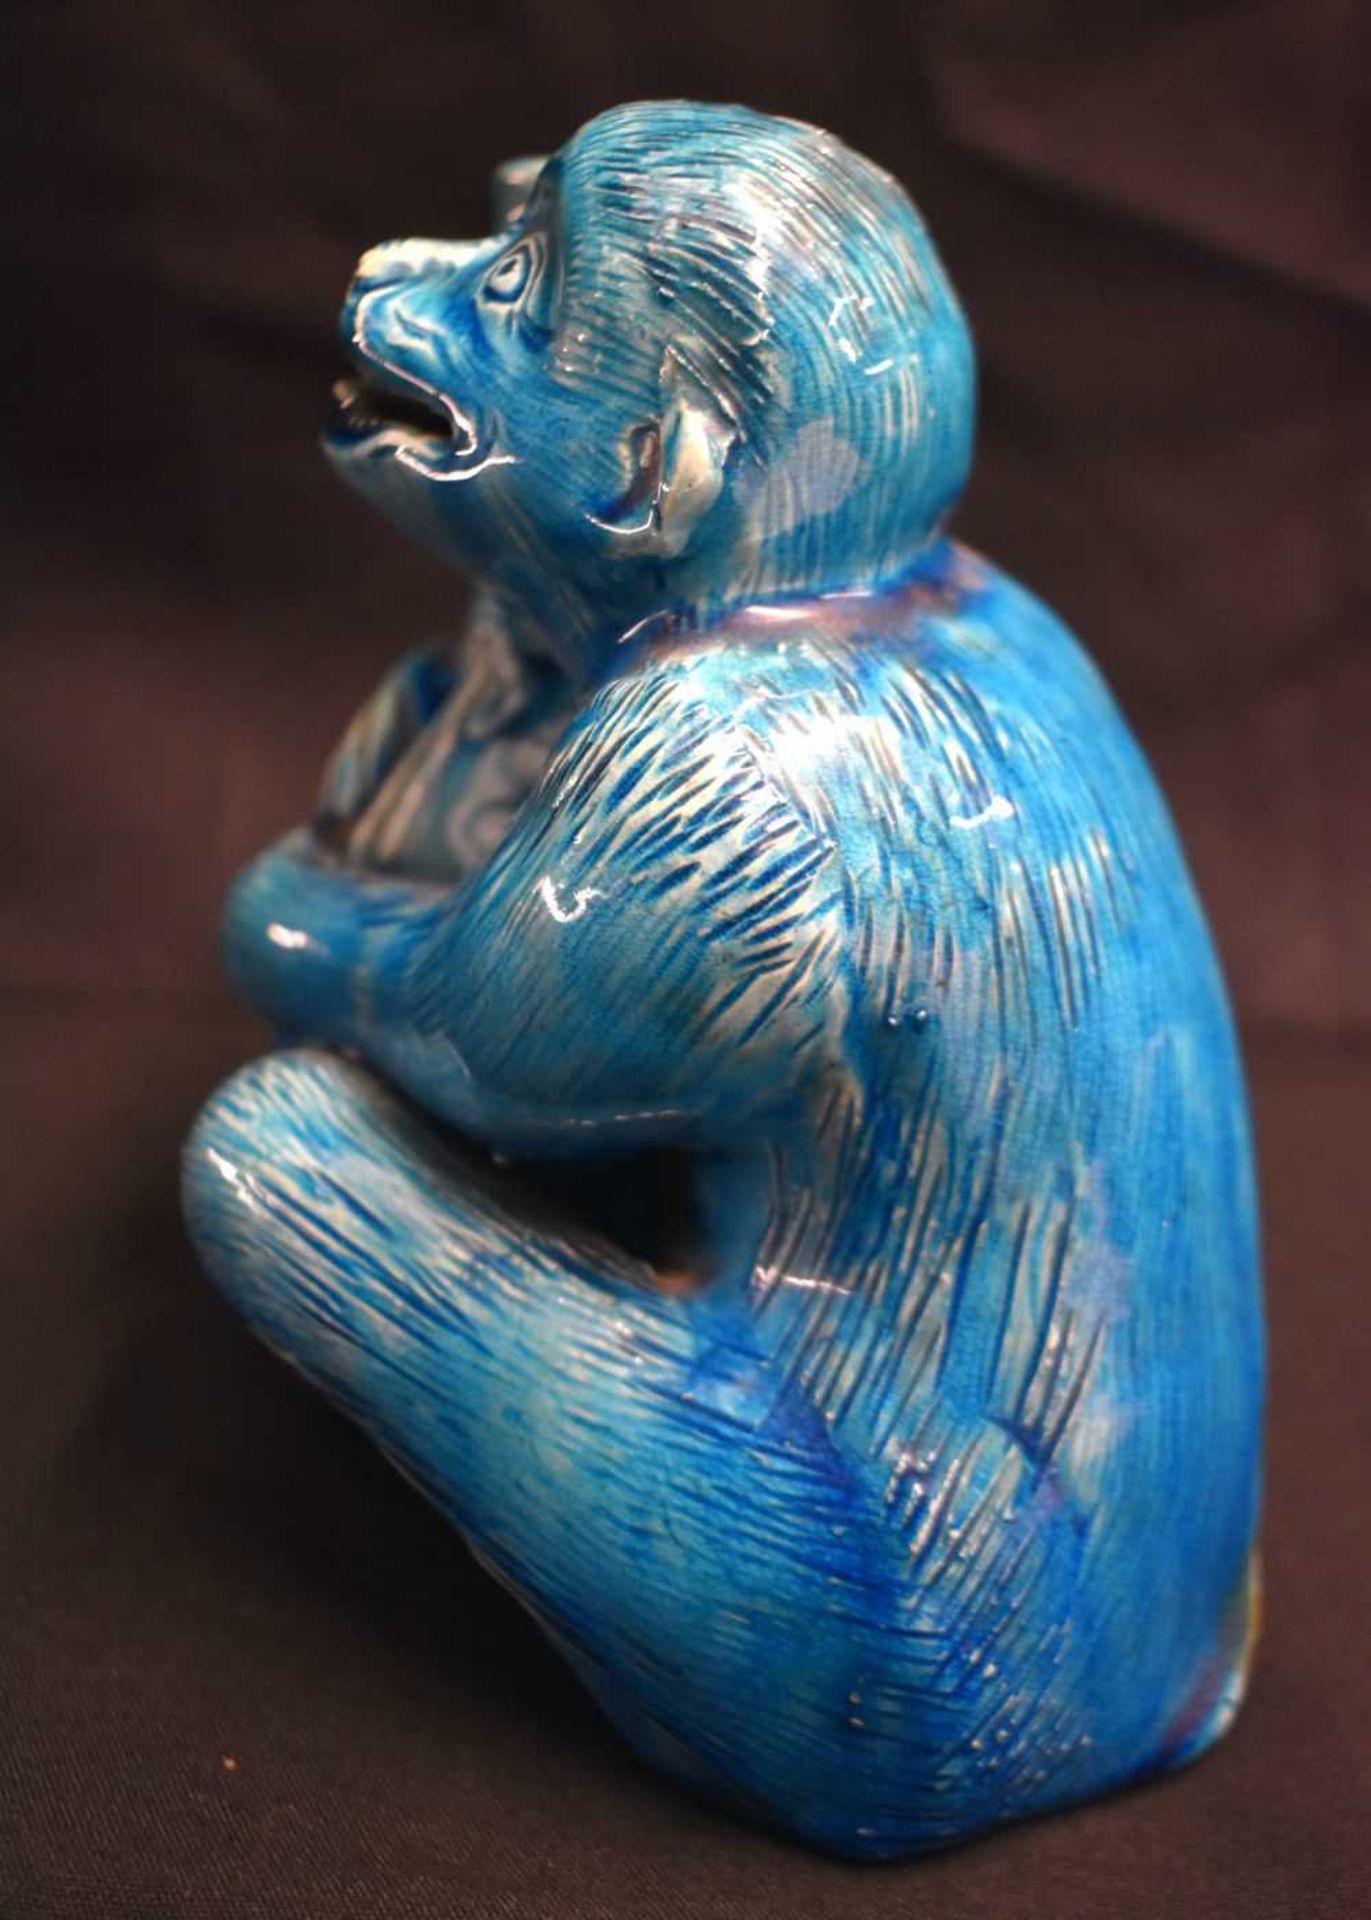 AN UNUSUAL 19TH CENTURY CHINESE BLUE GLAZED PORCELAIN MONKEY GOURD VASE or possibly Burmantofts. - Image 5 of 6